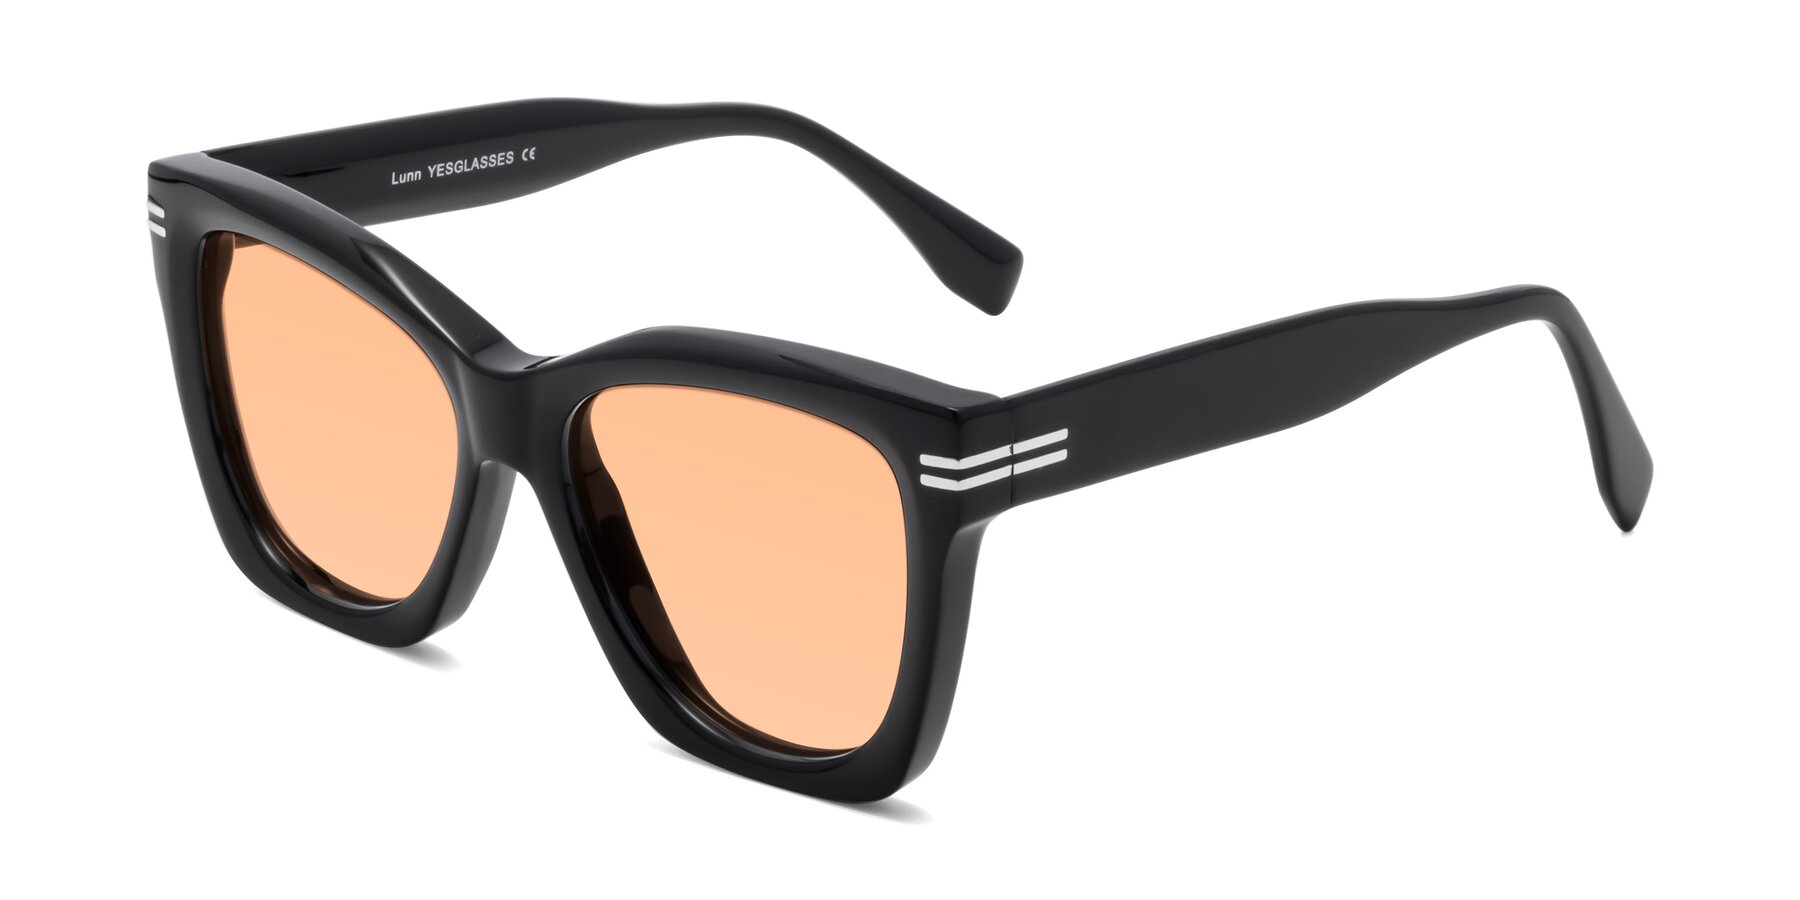 Angle of Lunn in Black with Light Orange Tinted Lenses